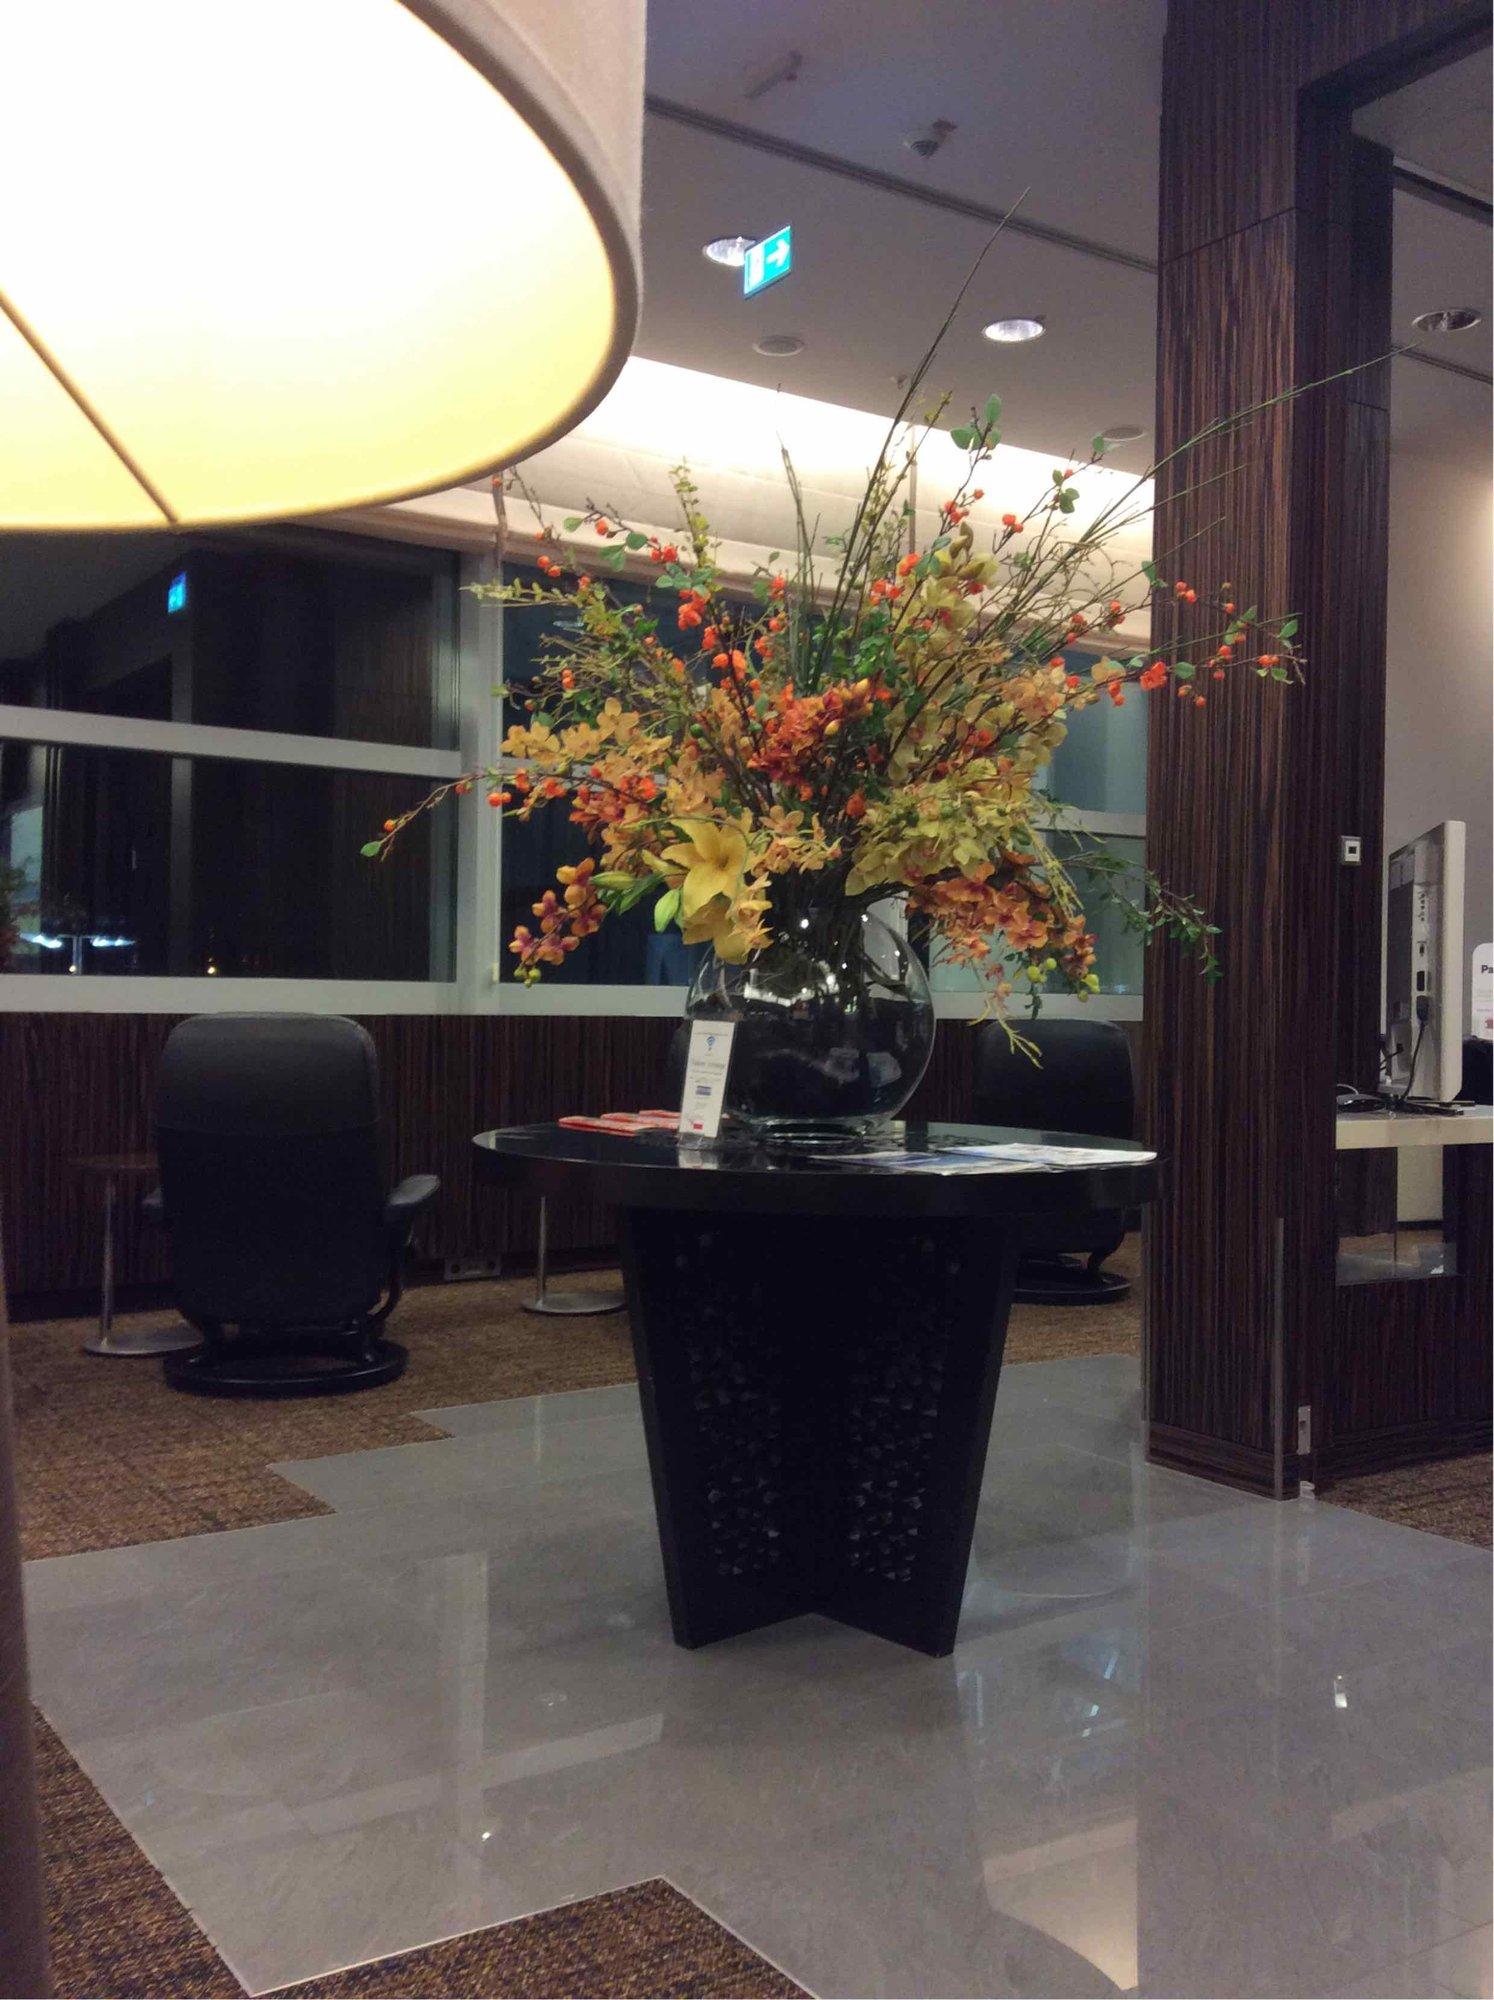 Japan Airlines JAL First Class Lounge image 7 of 10